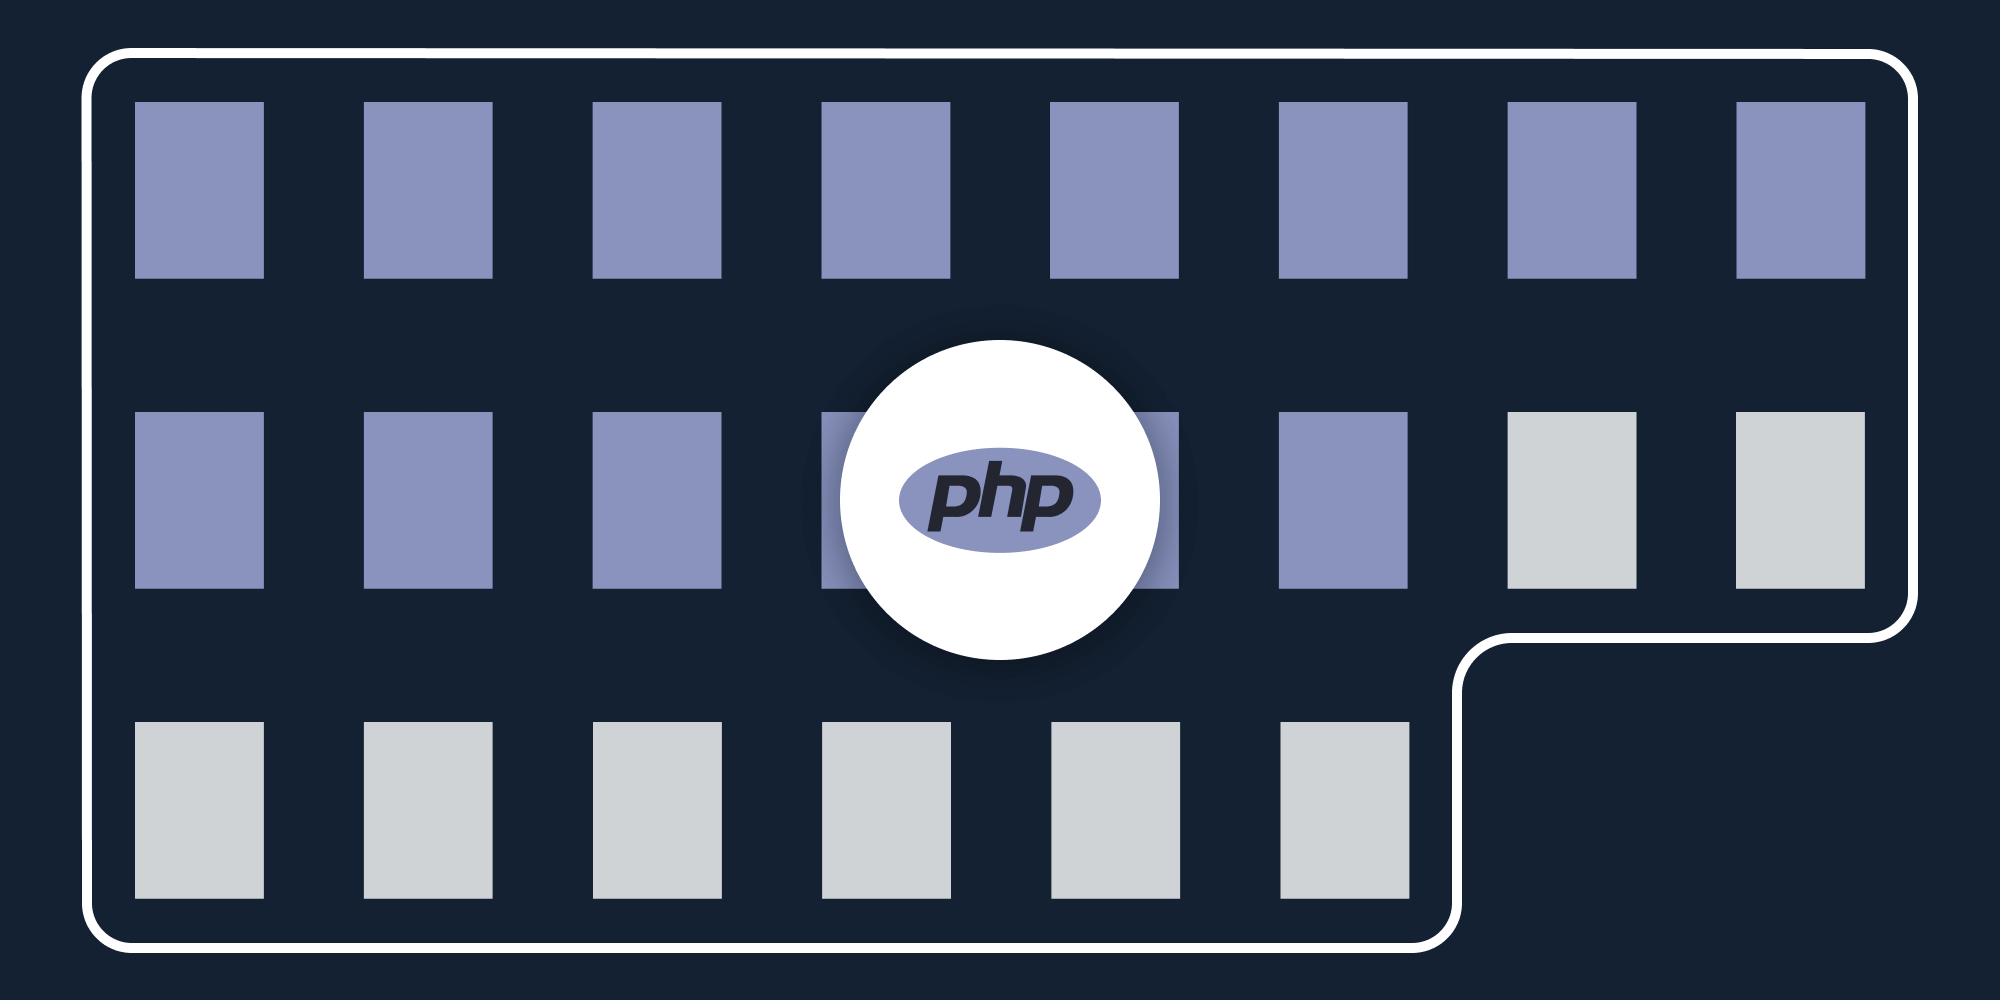 Illustration: How to Merge PDFs Using PHP